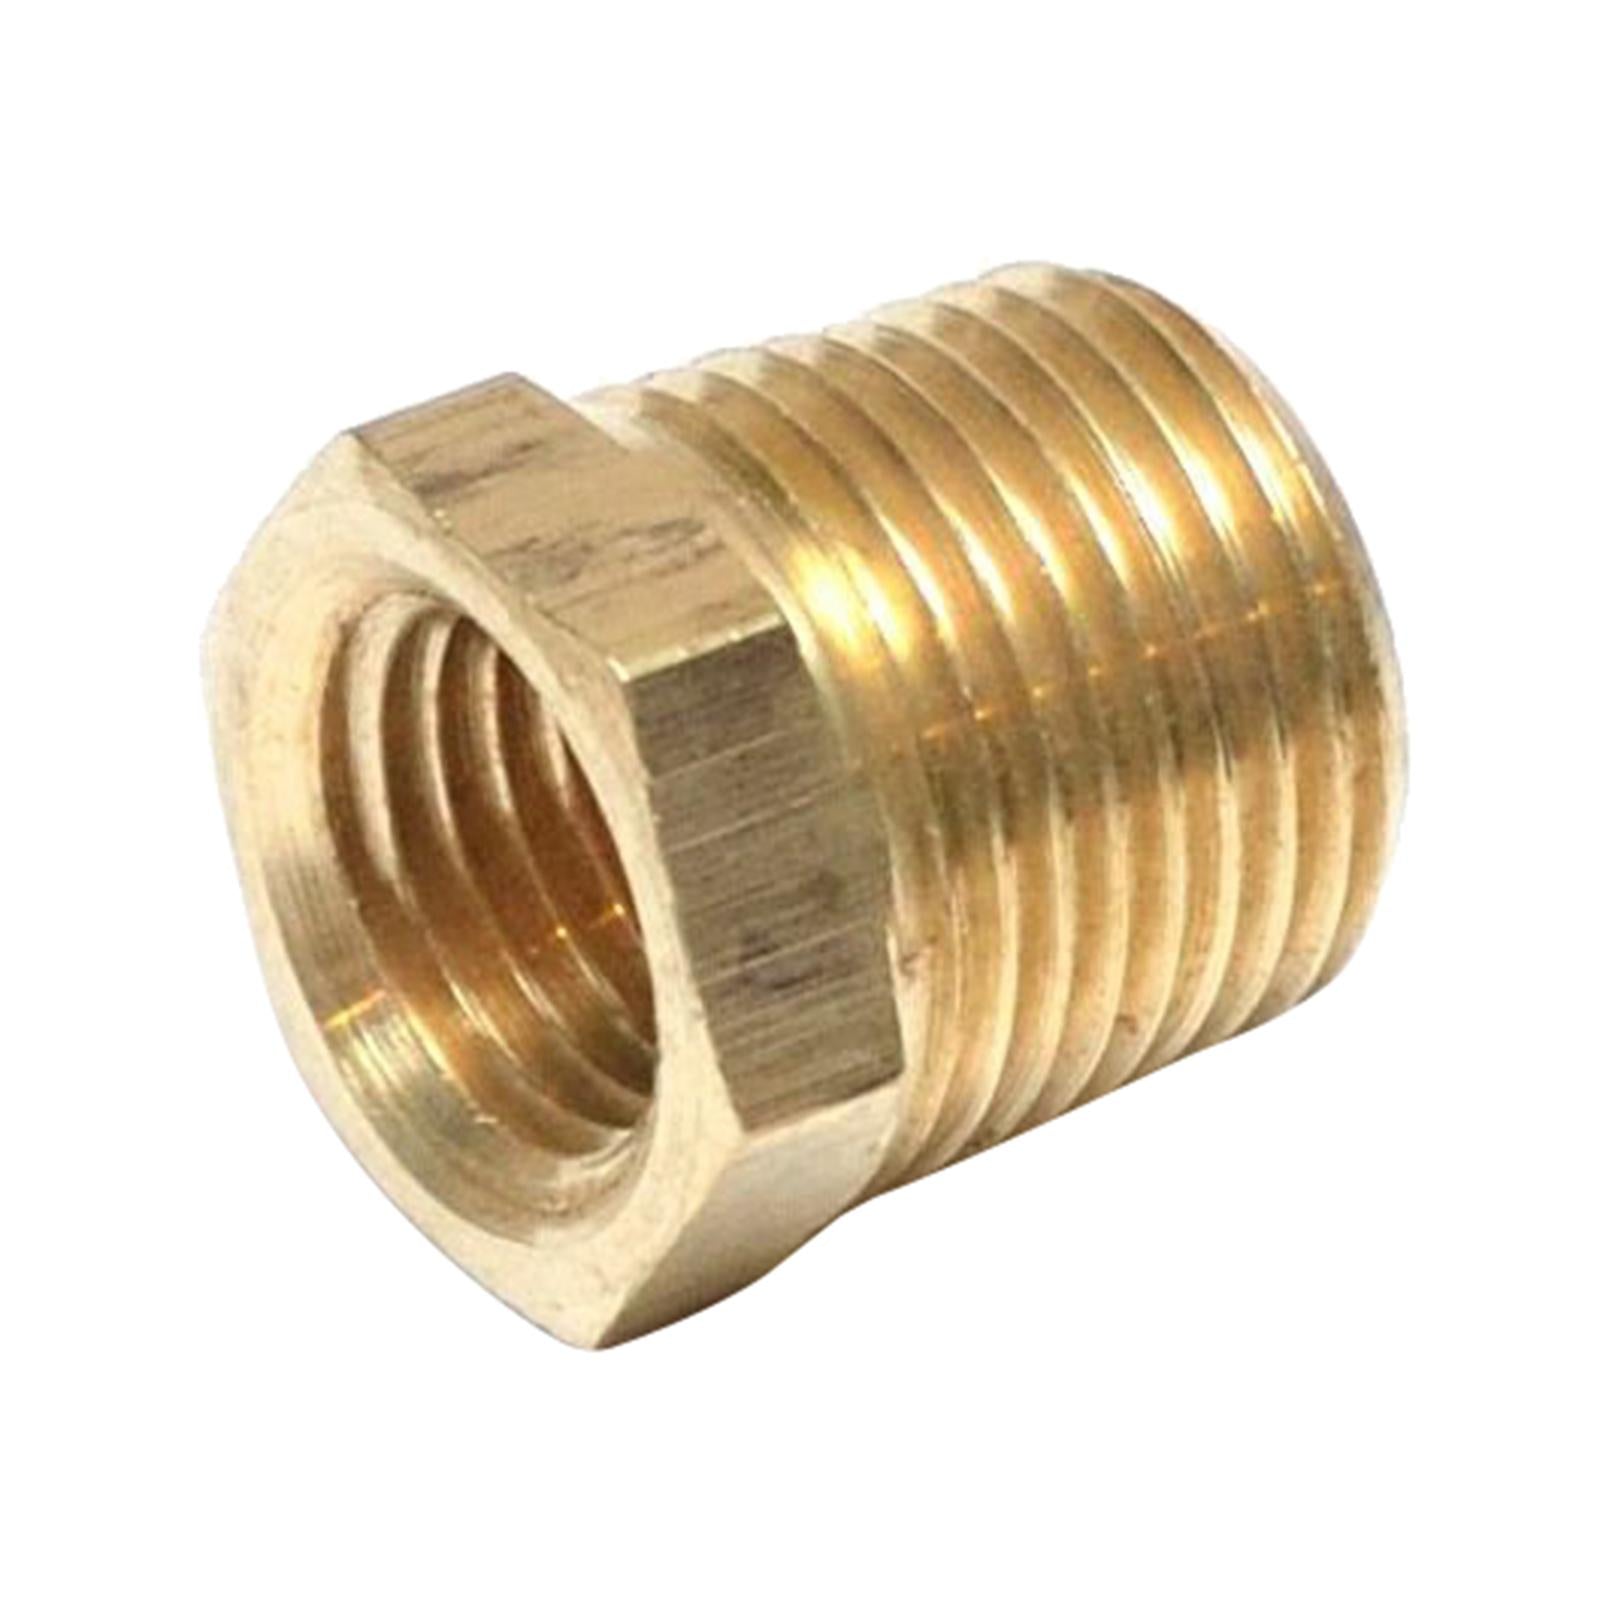 NPT Adapter 3/8 Male to 1/8 Female Npt Brass Pipe for Pressure Gauge Adapter